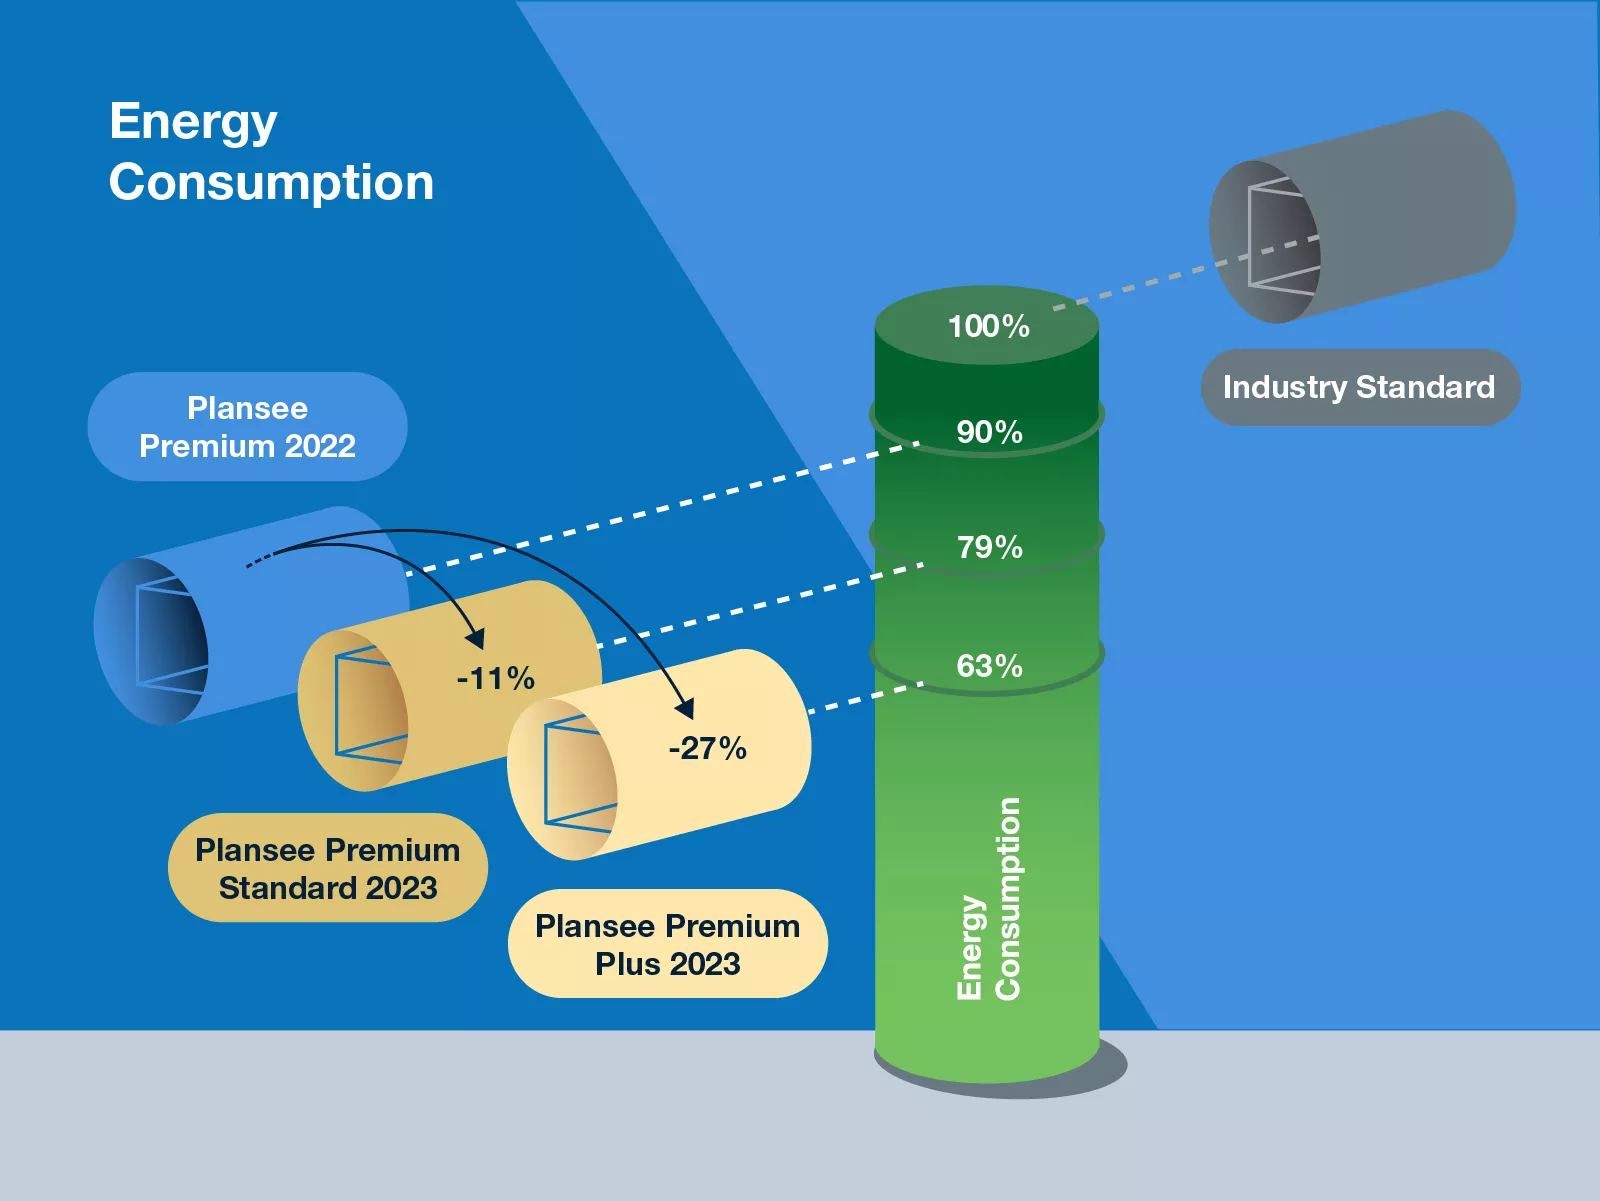 Energy consumption of Plansee hot zones